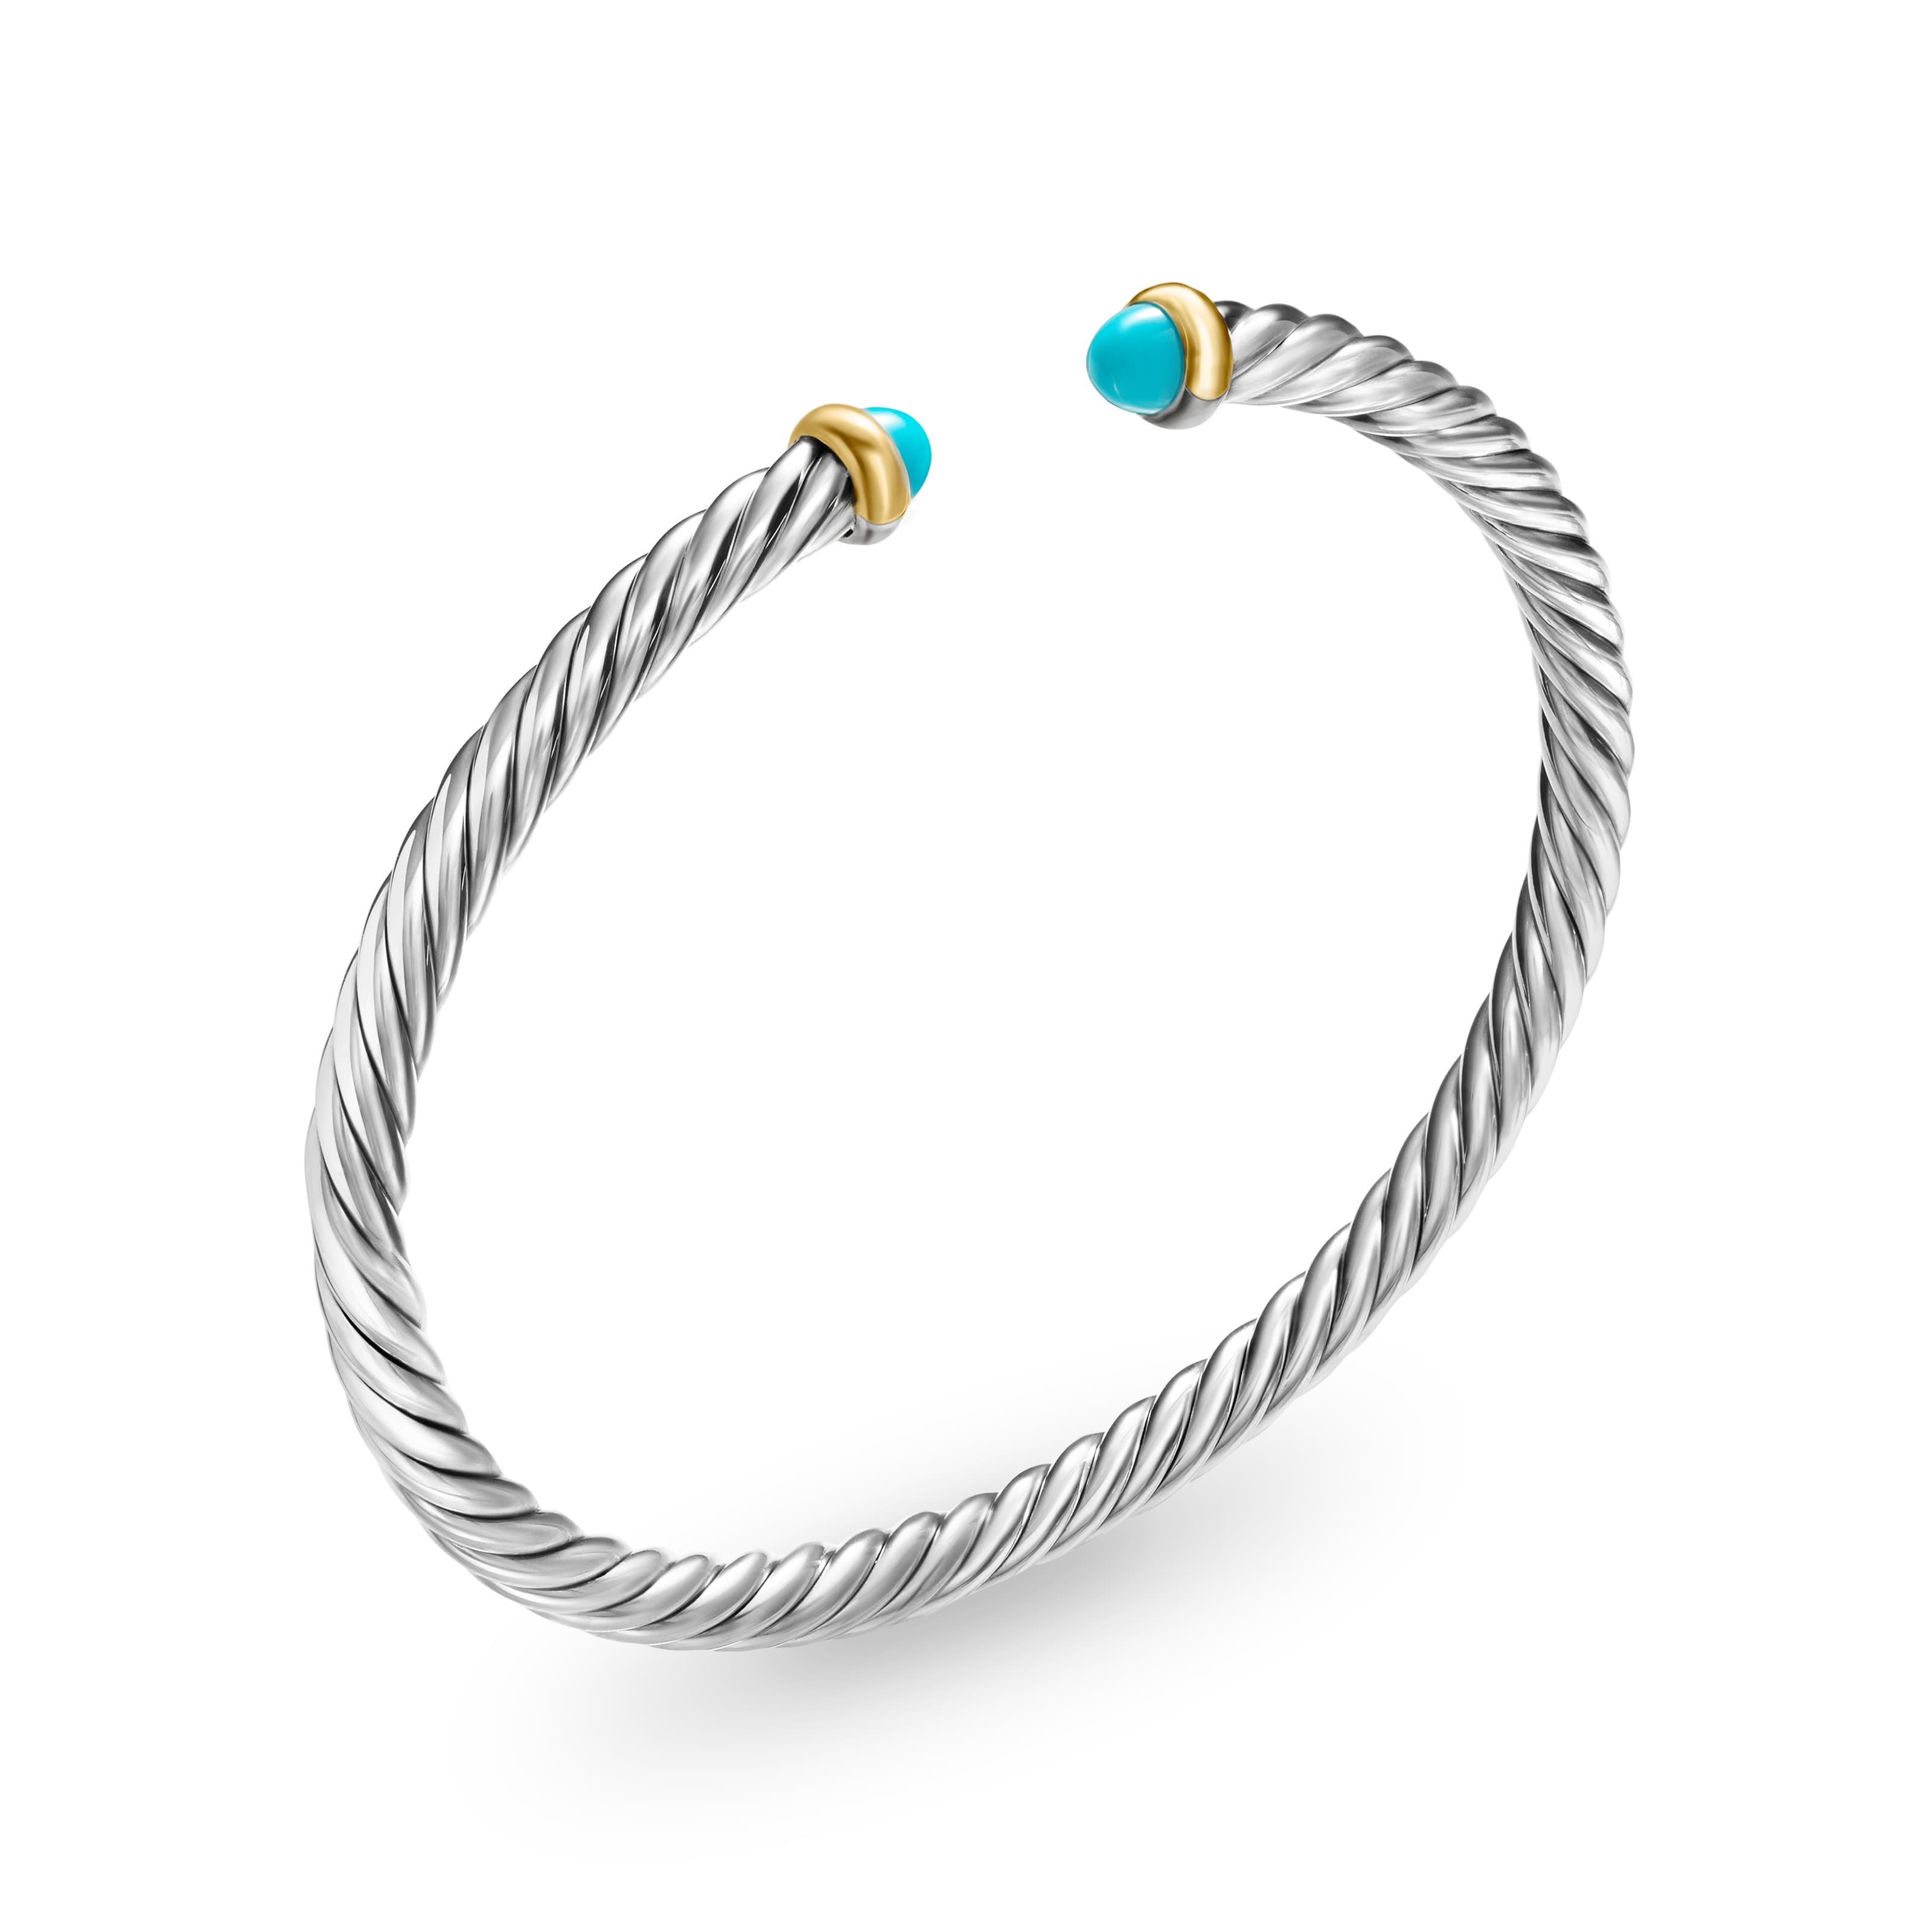 David Yurman Cable Flex Sterling Silver Bracelet with Turquoise, Size Medium 1